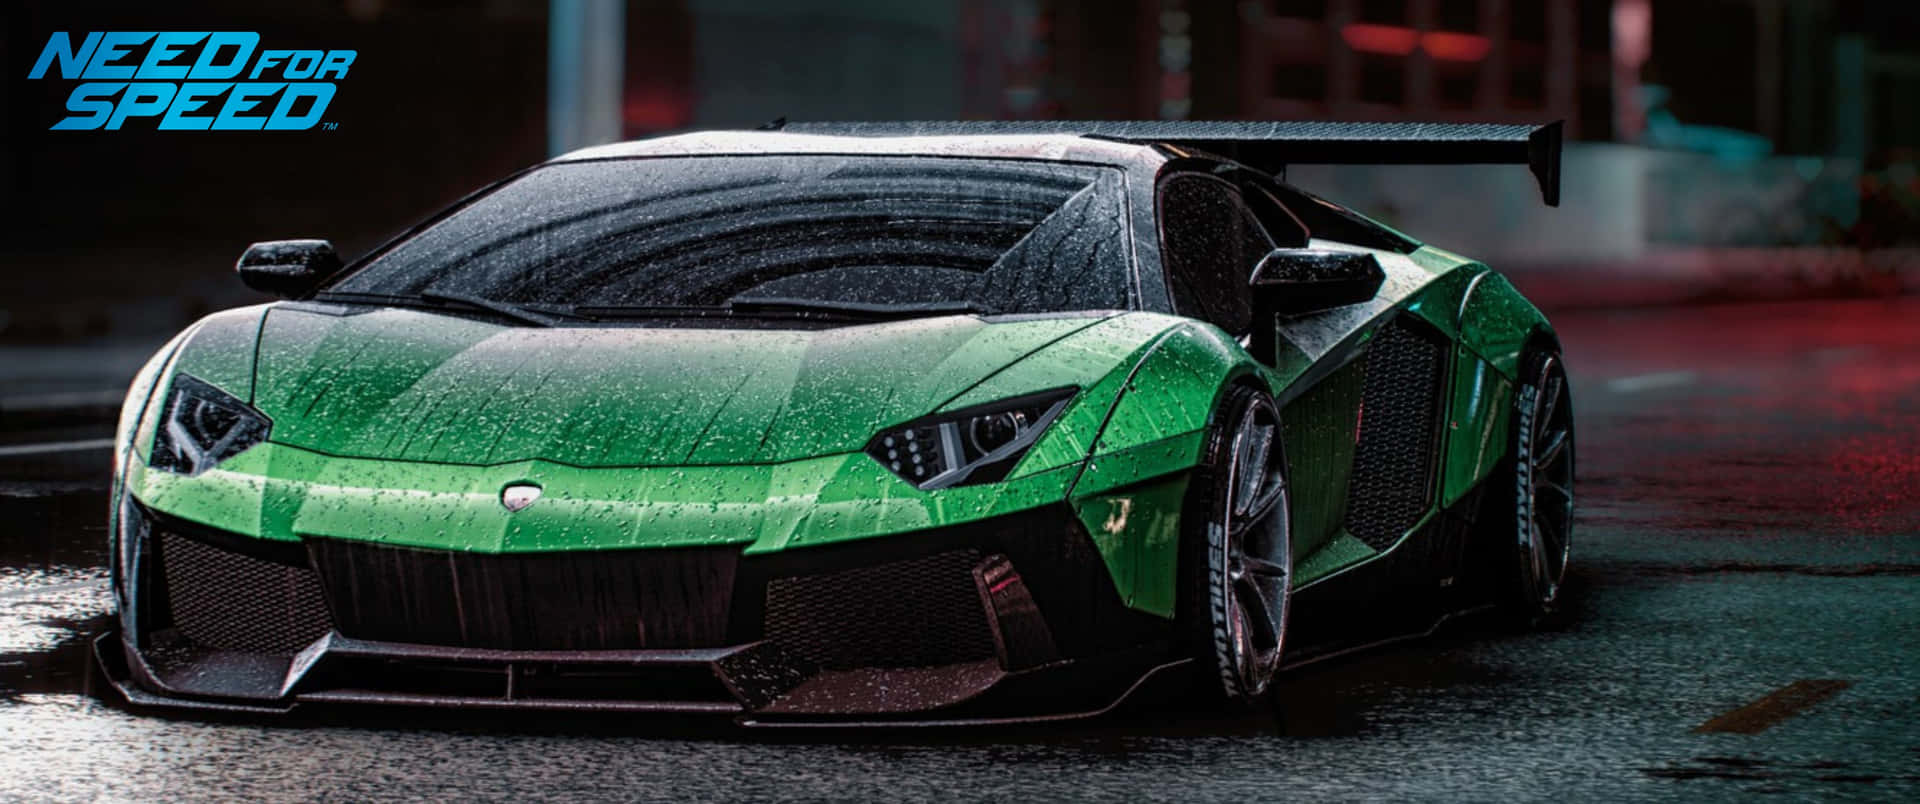 Need For Speed - A Green Car On A Rainy Day